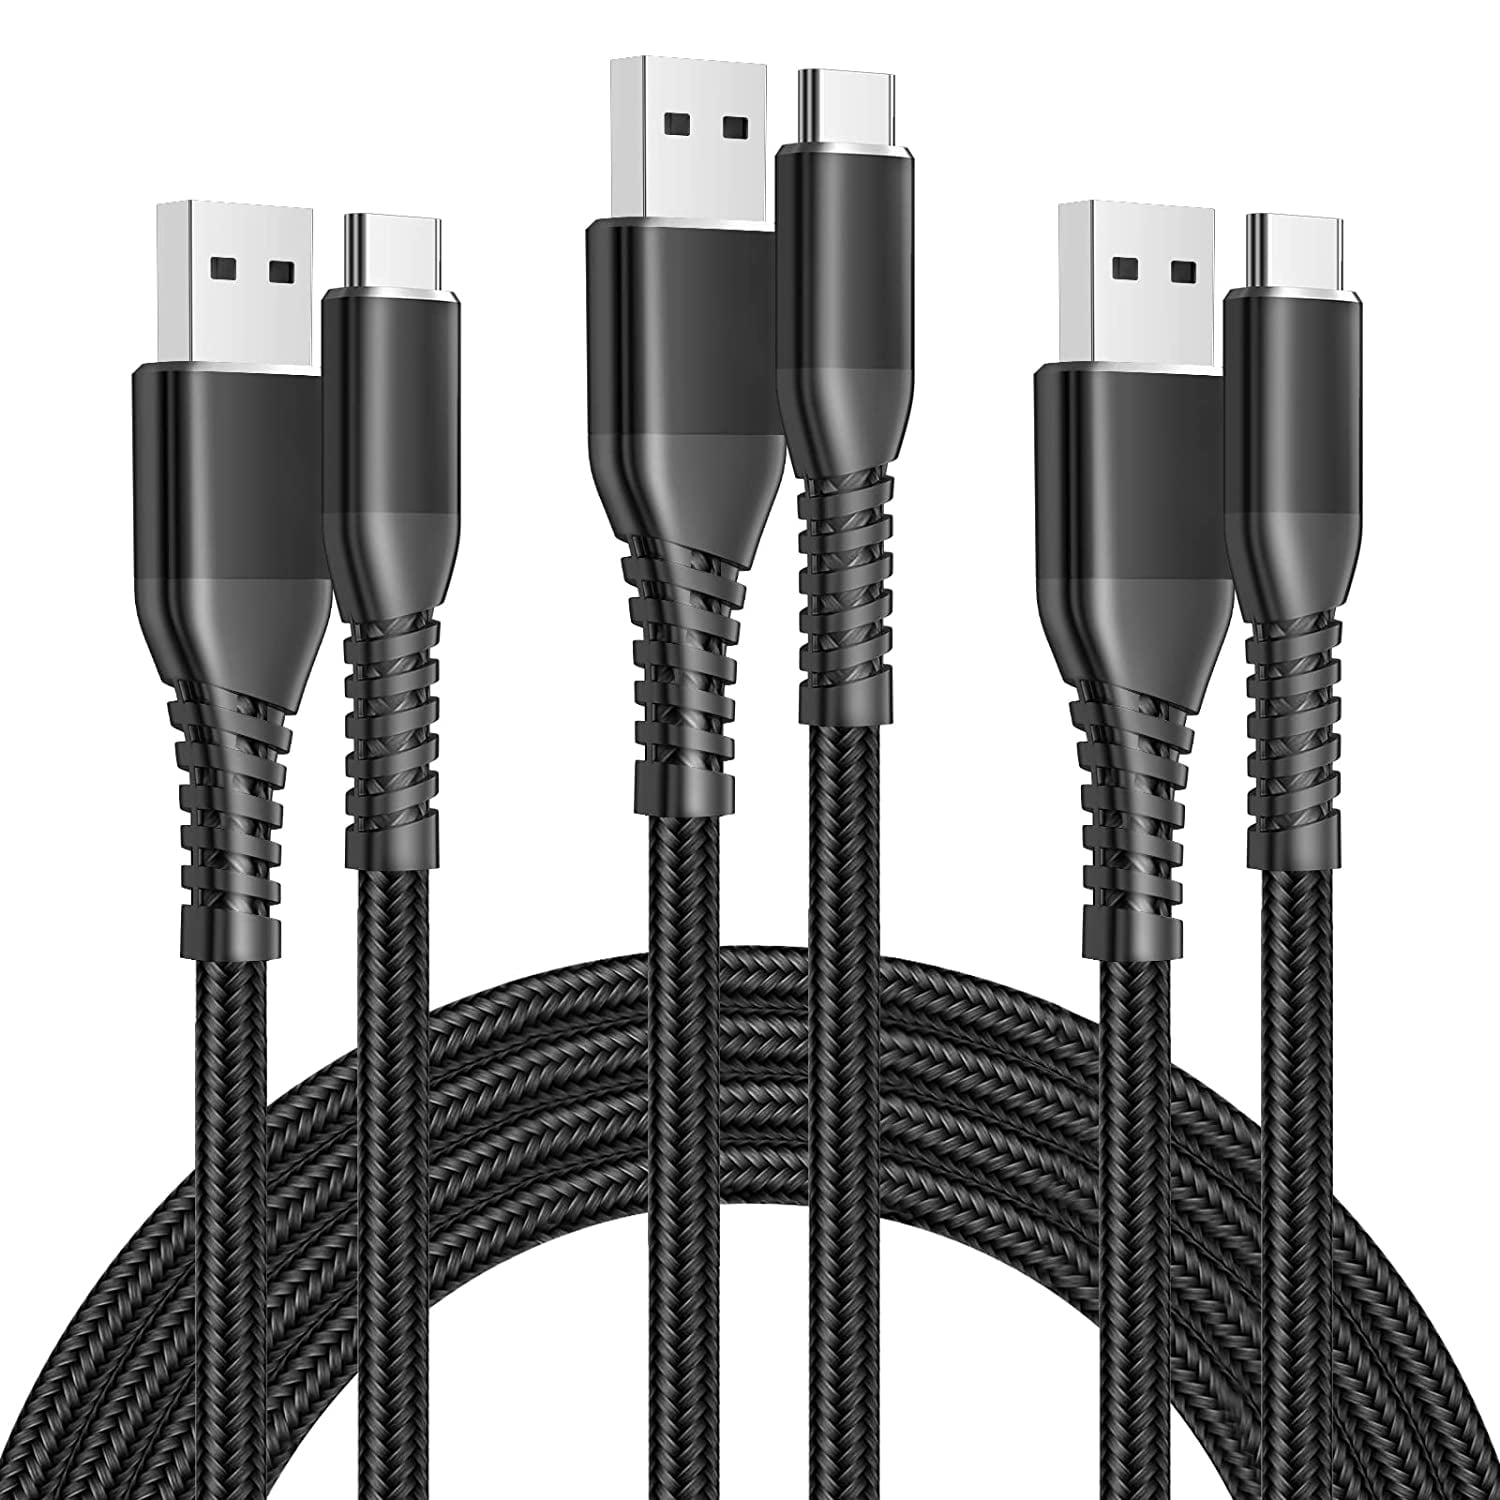 3FT 3FT 6FT 6FT 10FT Extra Long Nylon Braided USB Fast Charging&Syncing Cord Compatible with iPhone Xs MAX/XR/X/8 Plus/7 Plus/6 Plus/6 Silver Charger Cable MFi Certified Cable,6Pack 